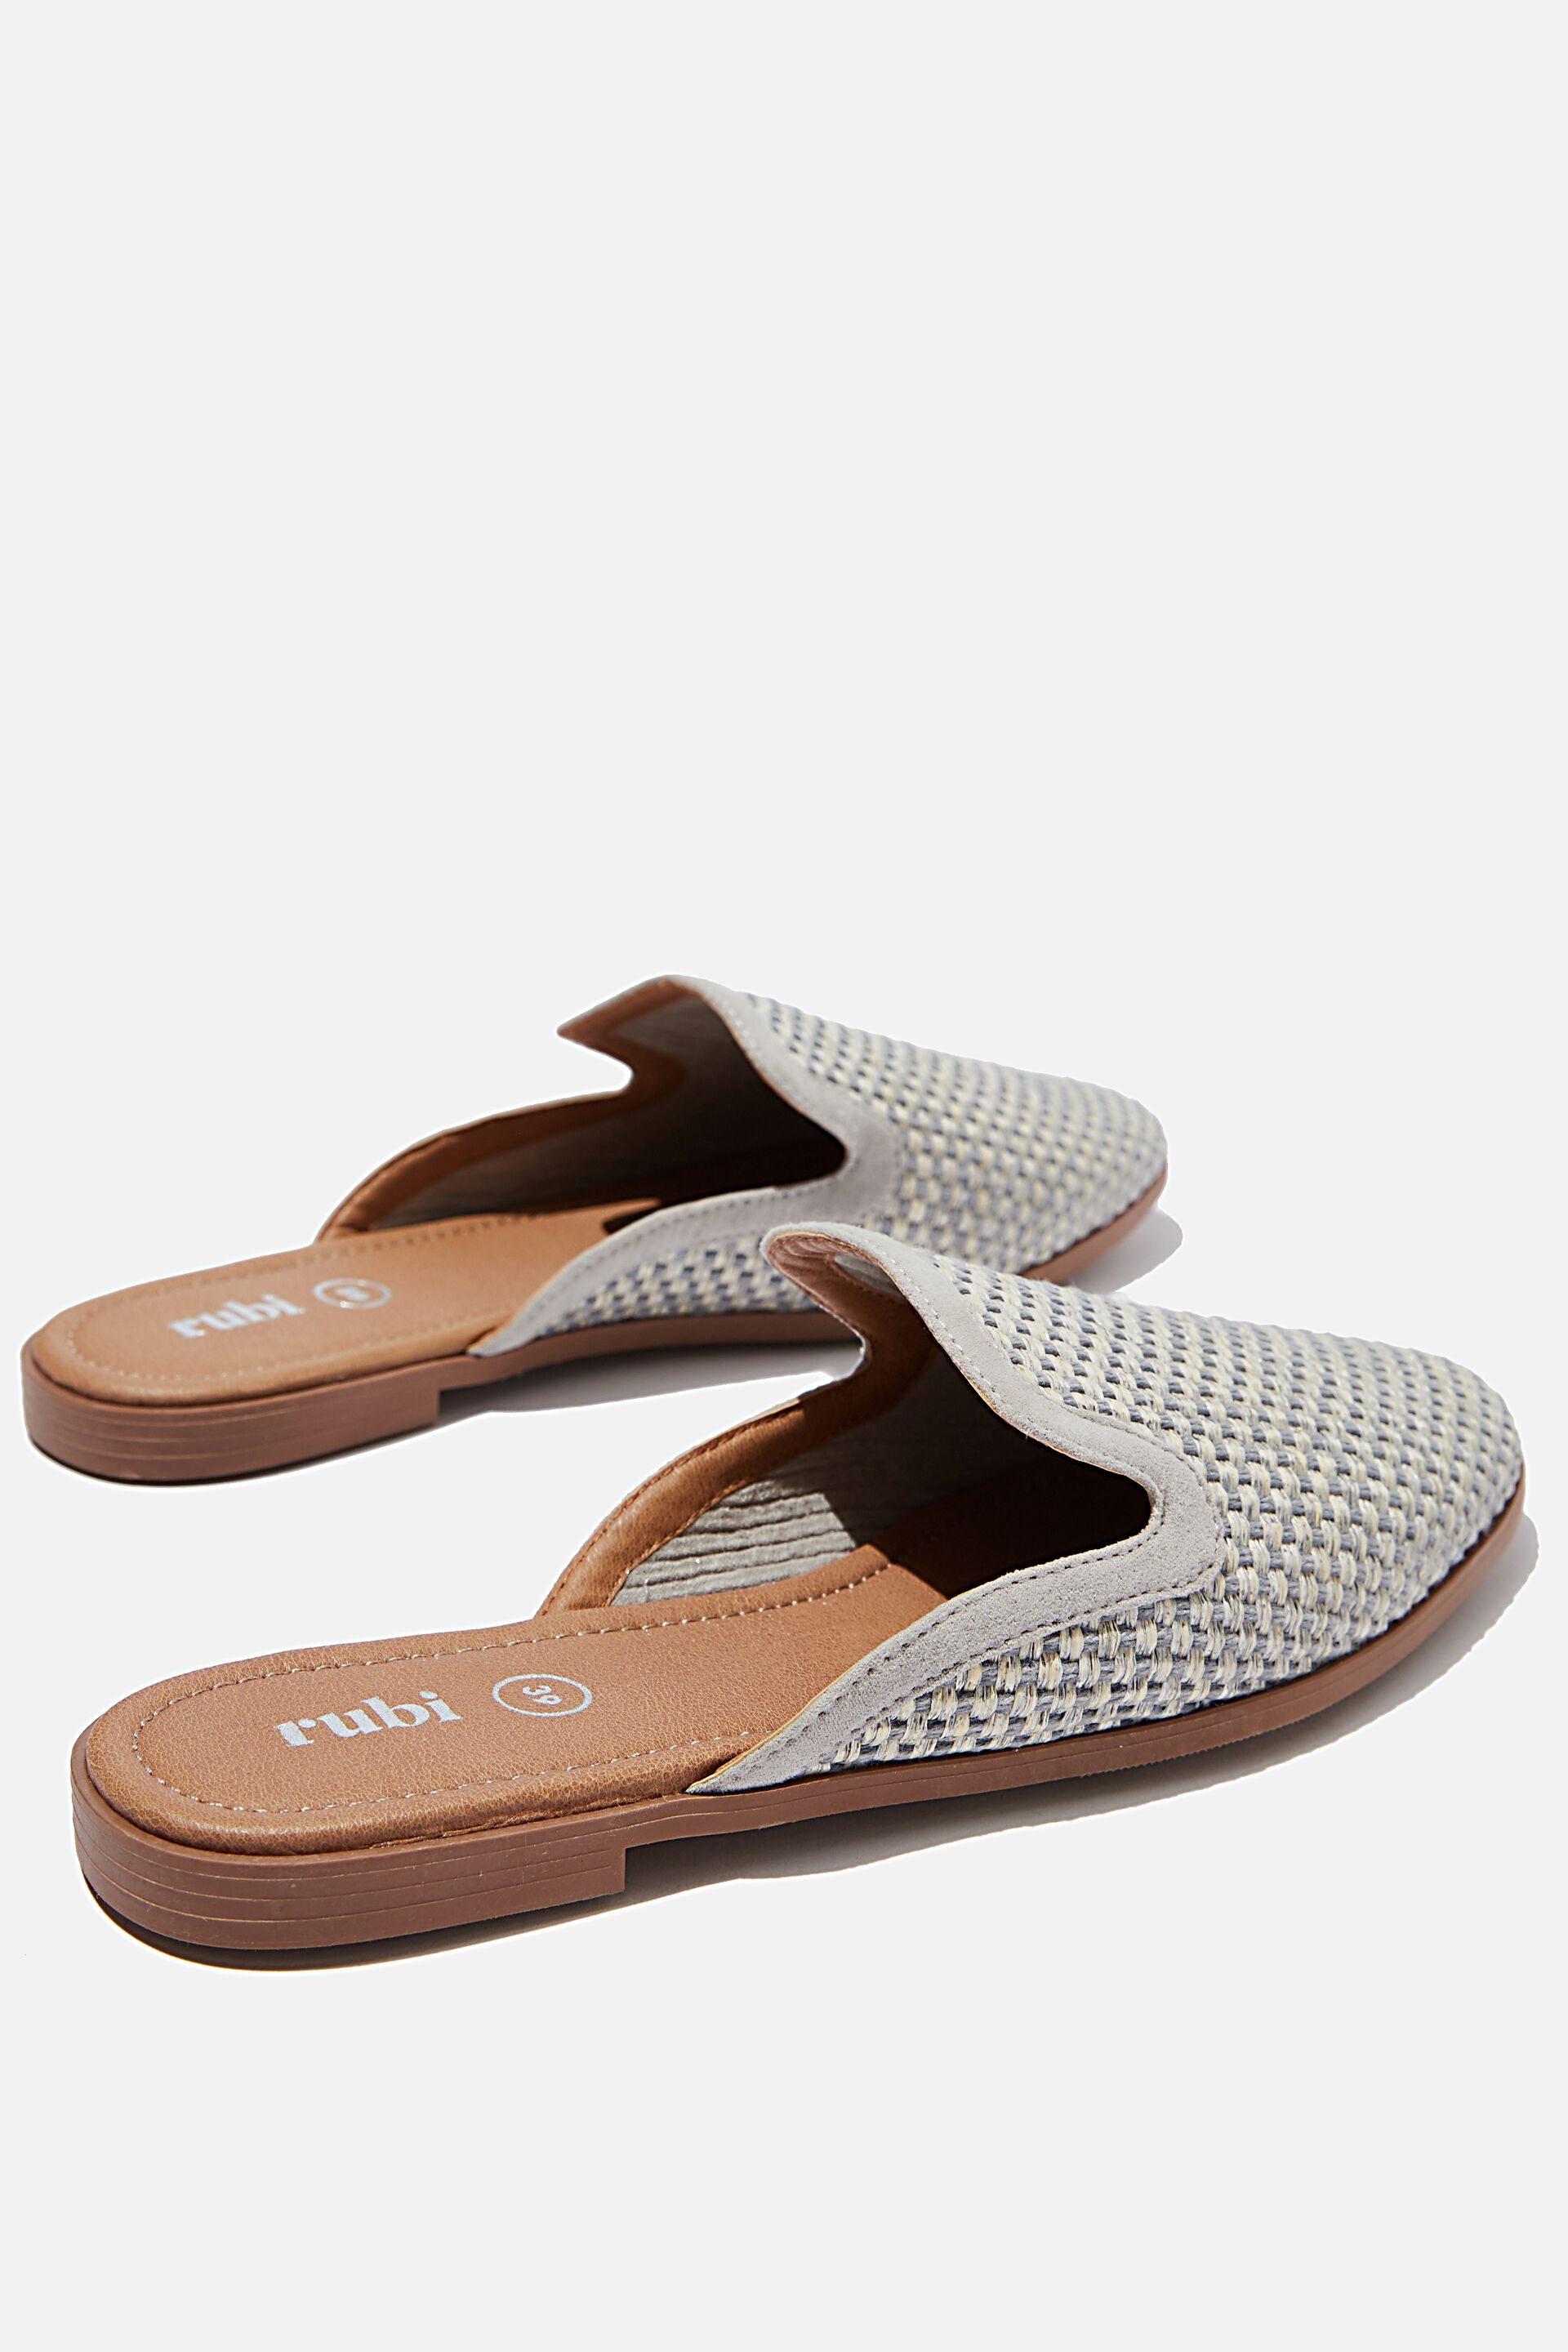 Flat Shoes, Loafers \u0026 Mules | Cotton On